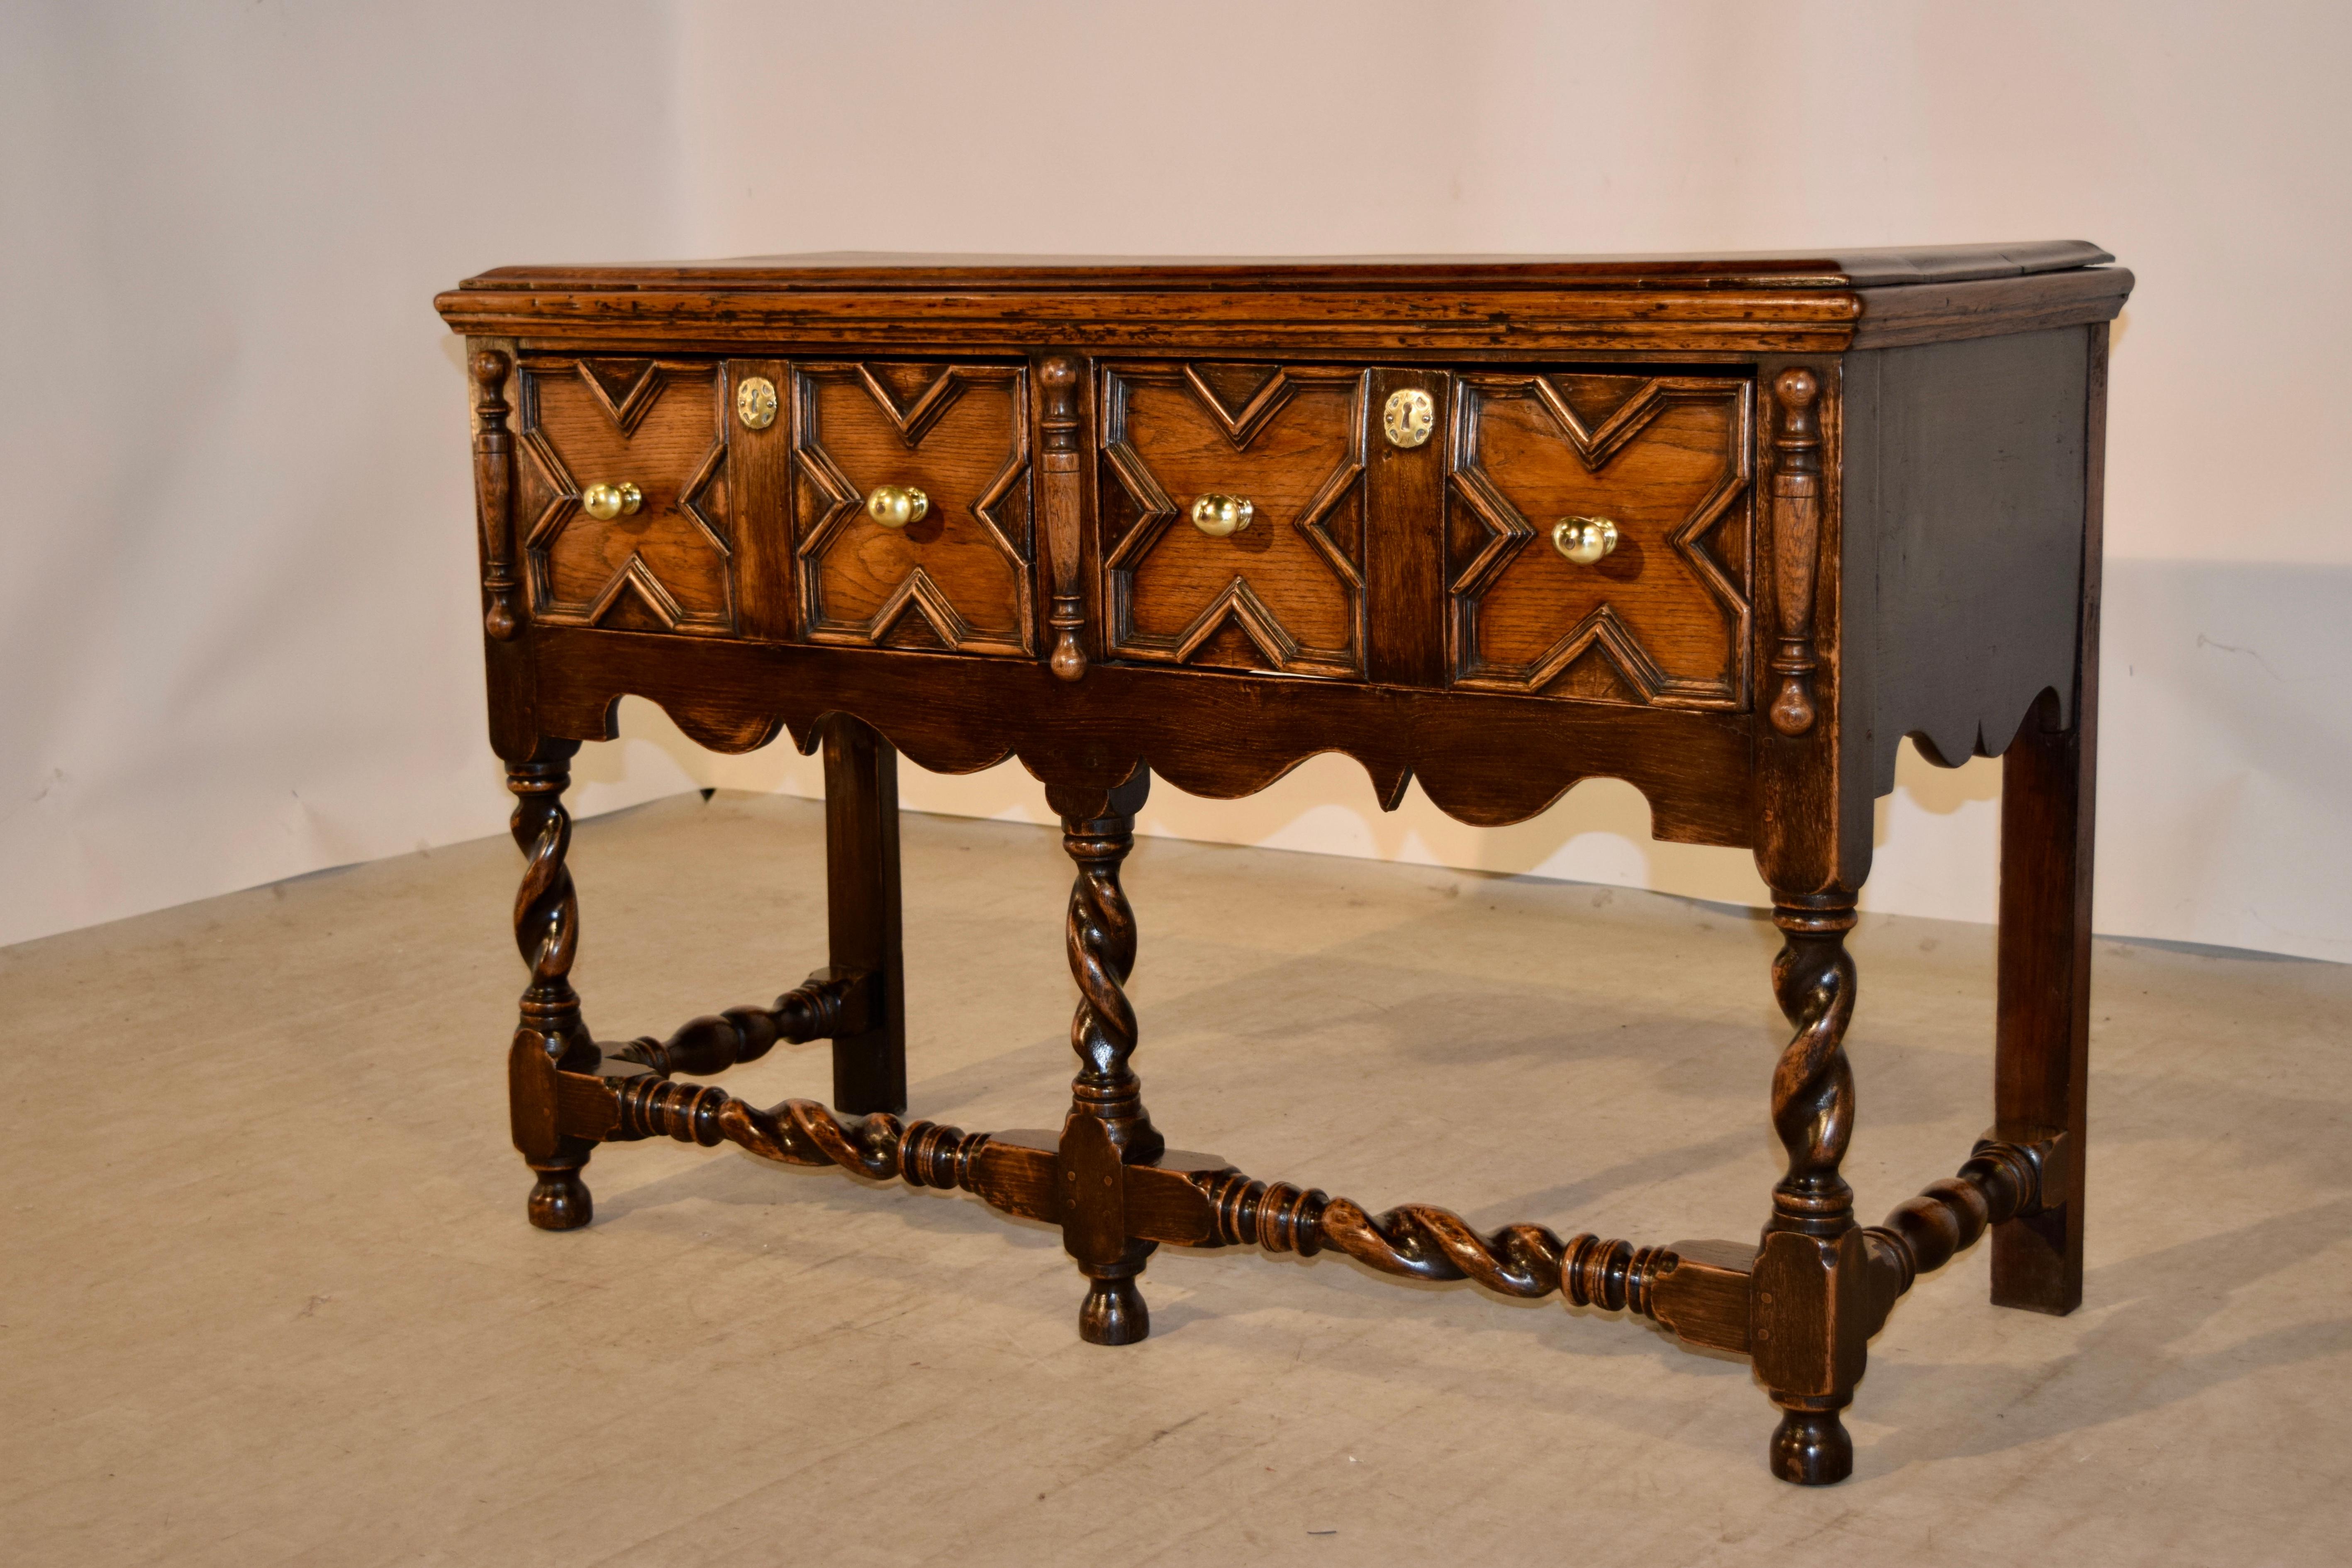 19th century English oak sideboard with a beveled edge around the top following down to simple sides with lovely scalloping on the aprons and two drawers in the front which are geometric raised paneled and are flanked by applied turnings. The piece